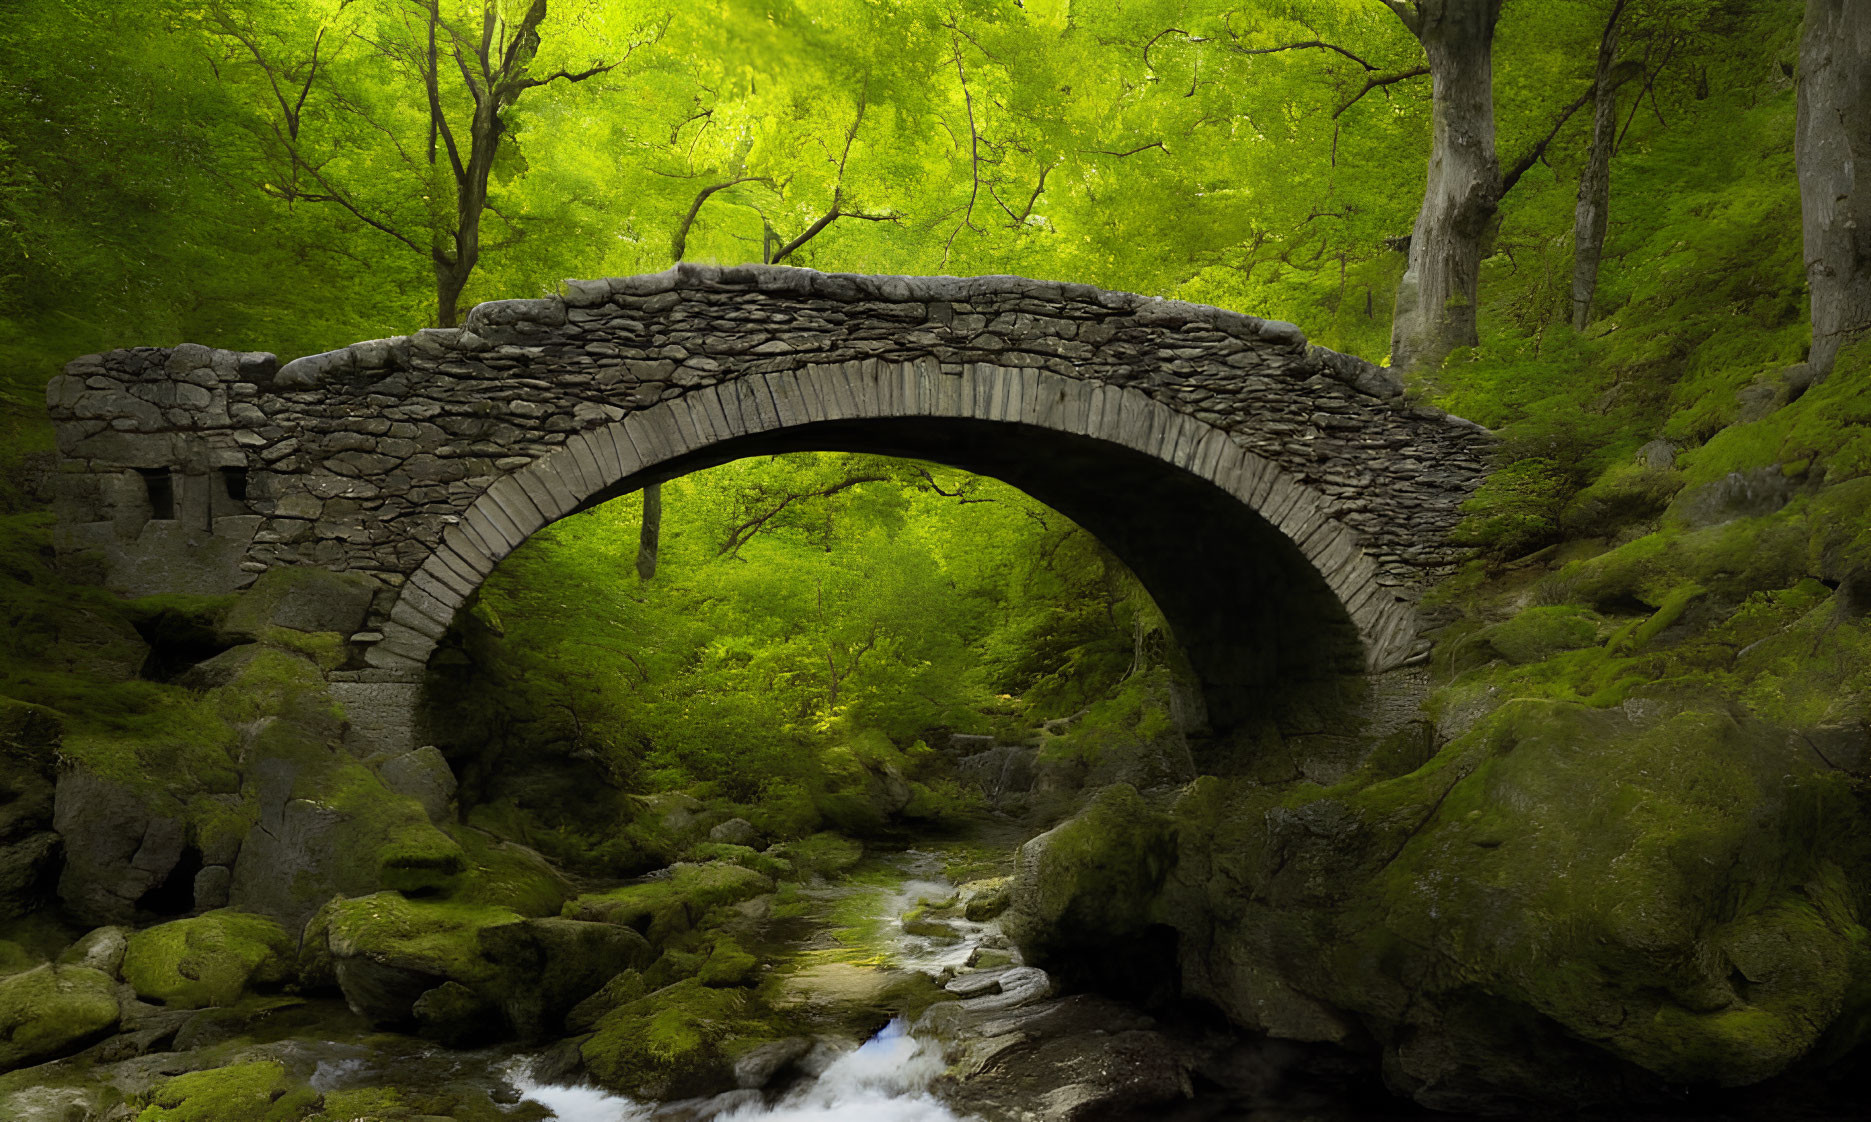 Stone bridge over stream in lush green forest with light filtering through canopy